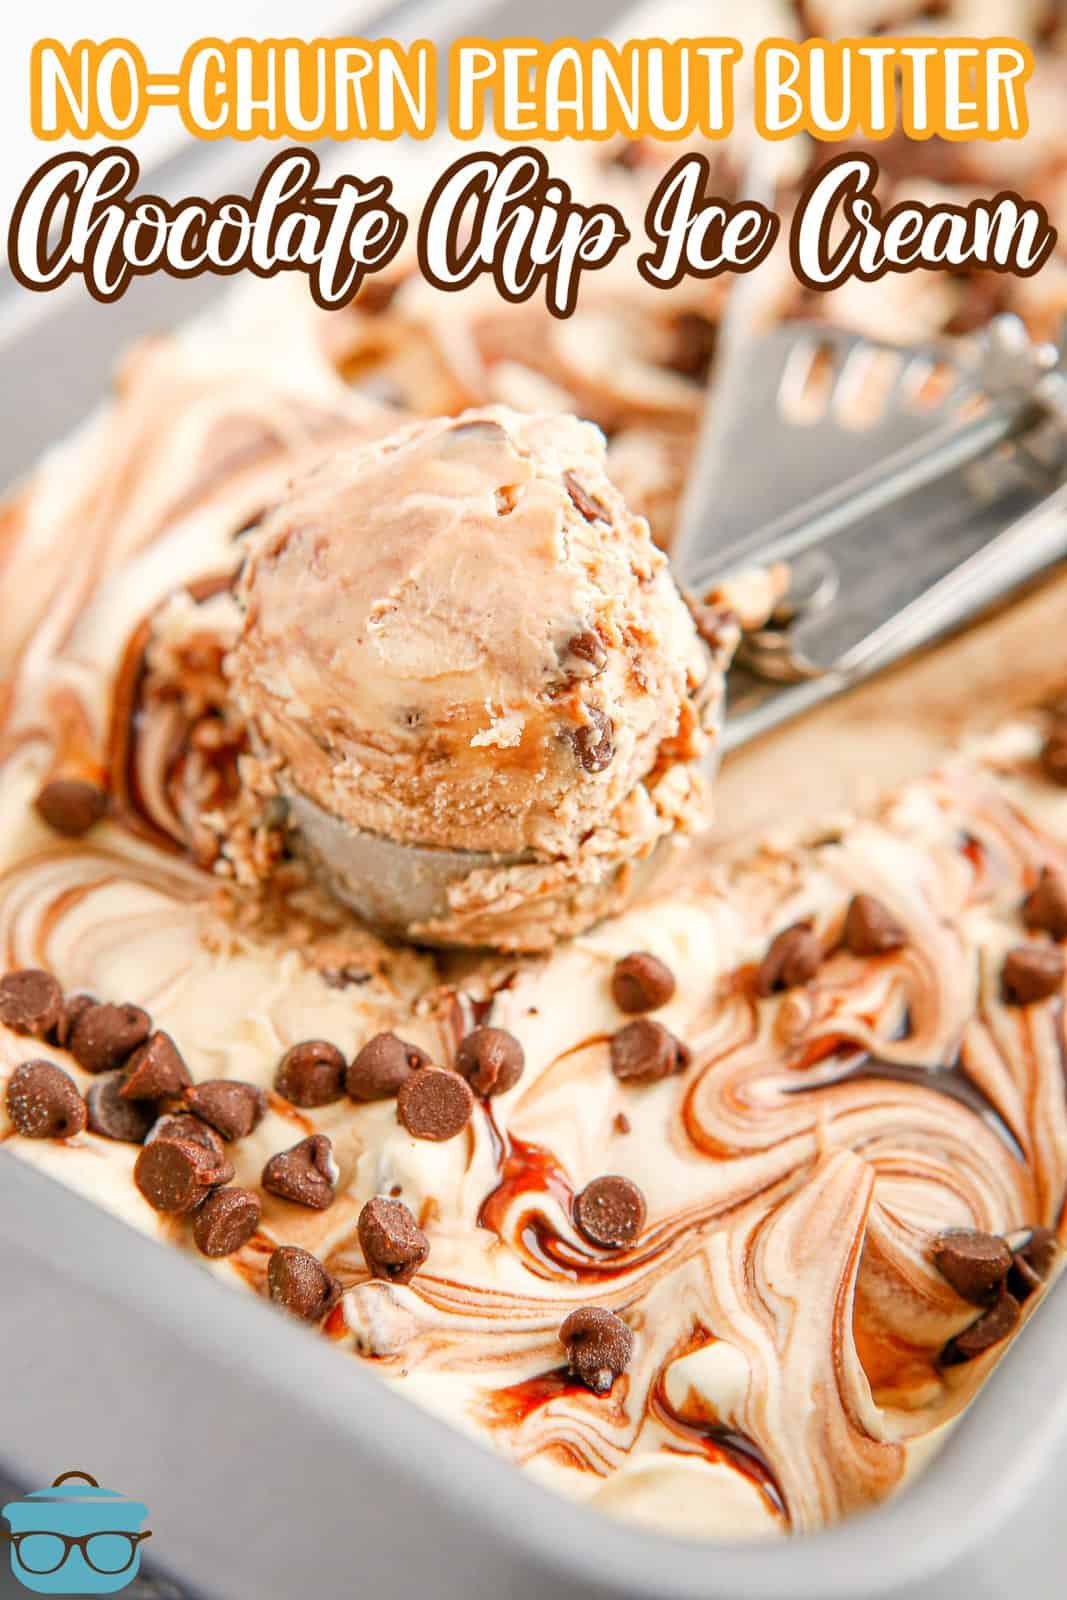 No-Churn Peanut Butter Chocolate Chip Ice Cream in pan with ice cream scoop, Pinterest image.